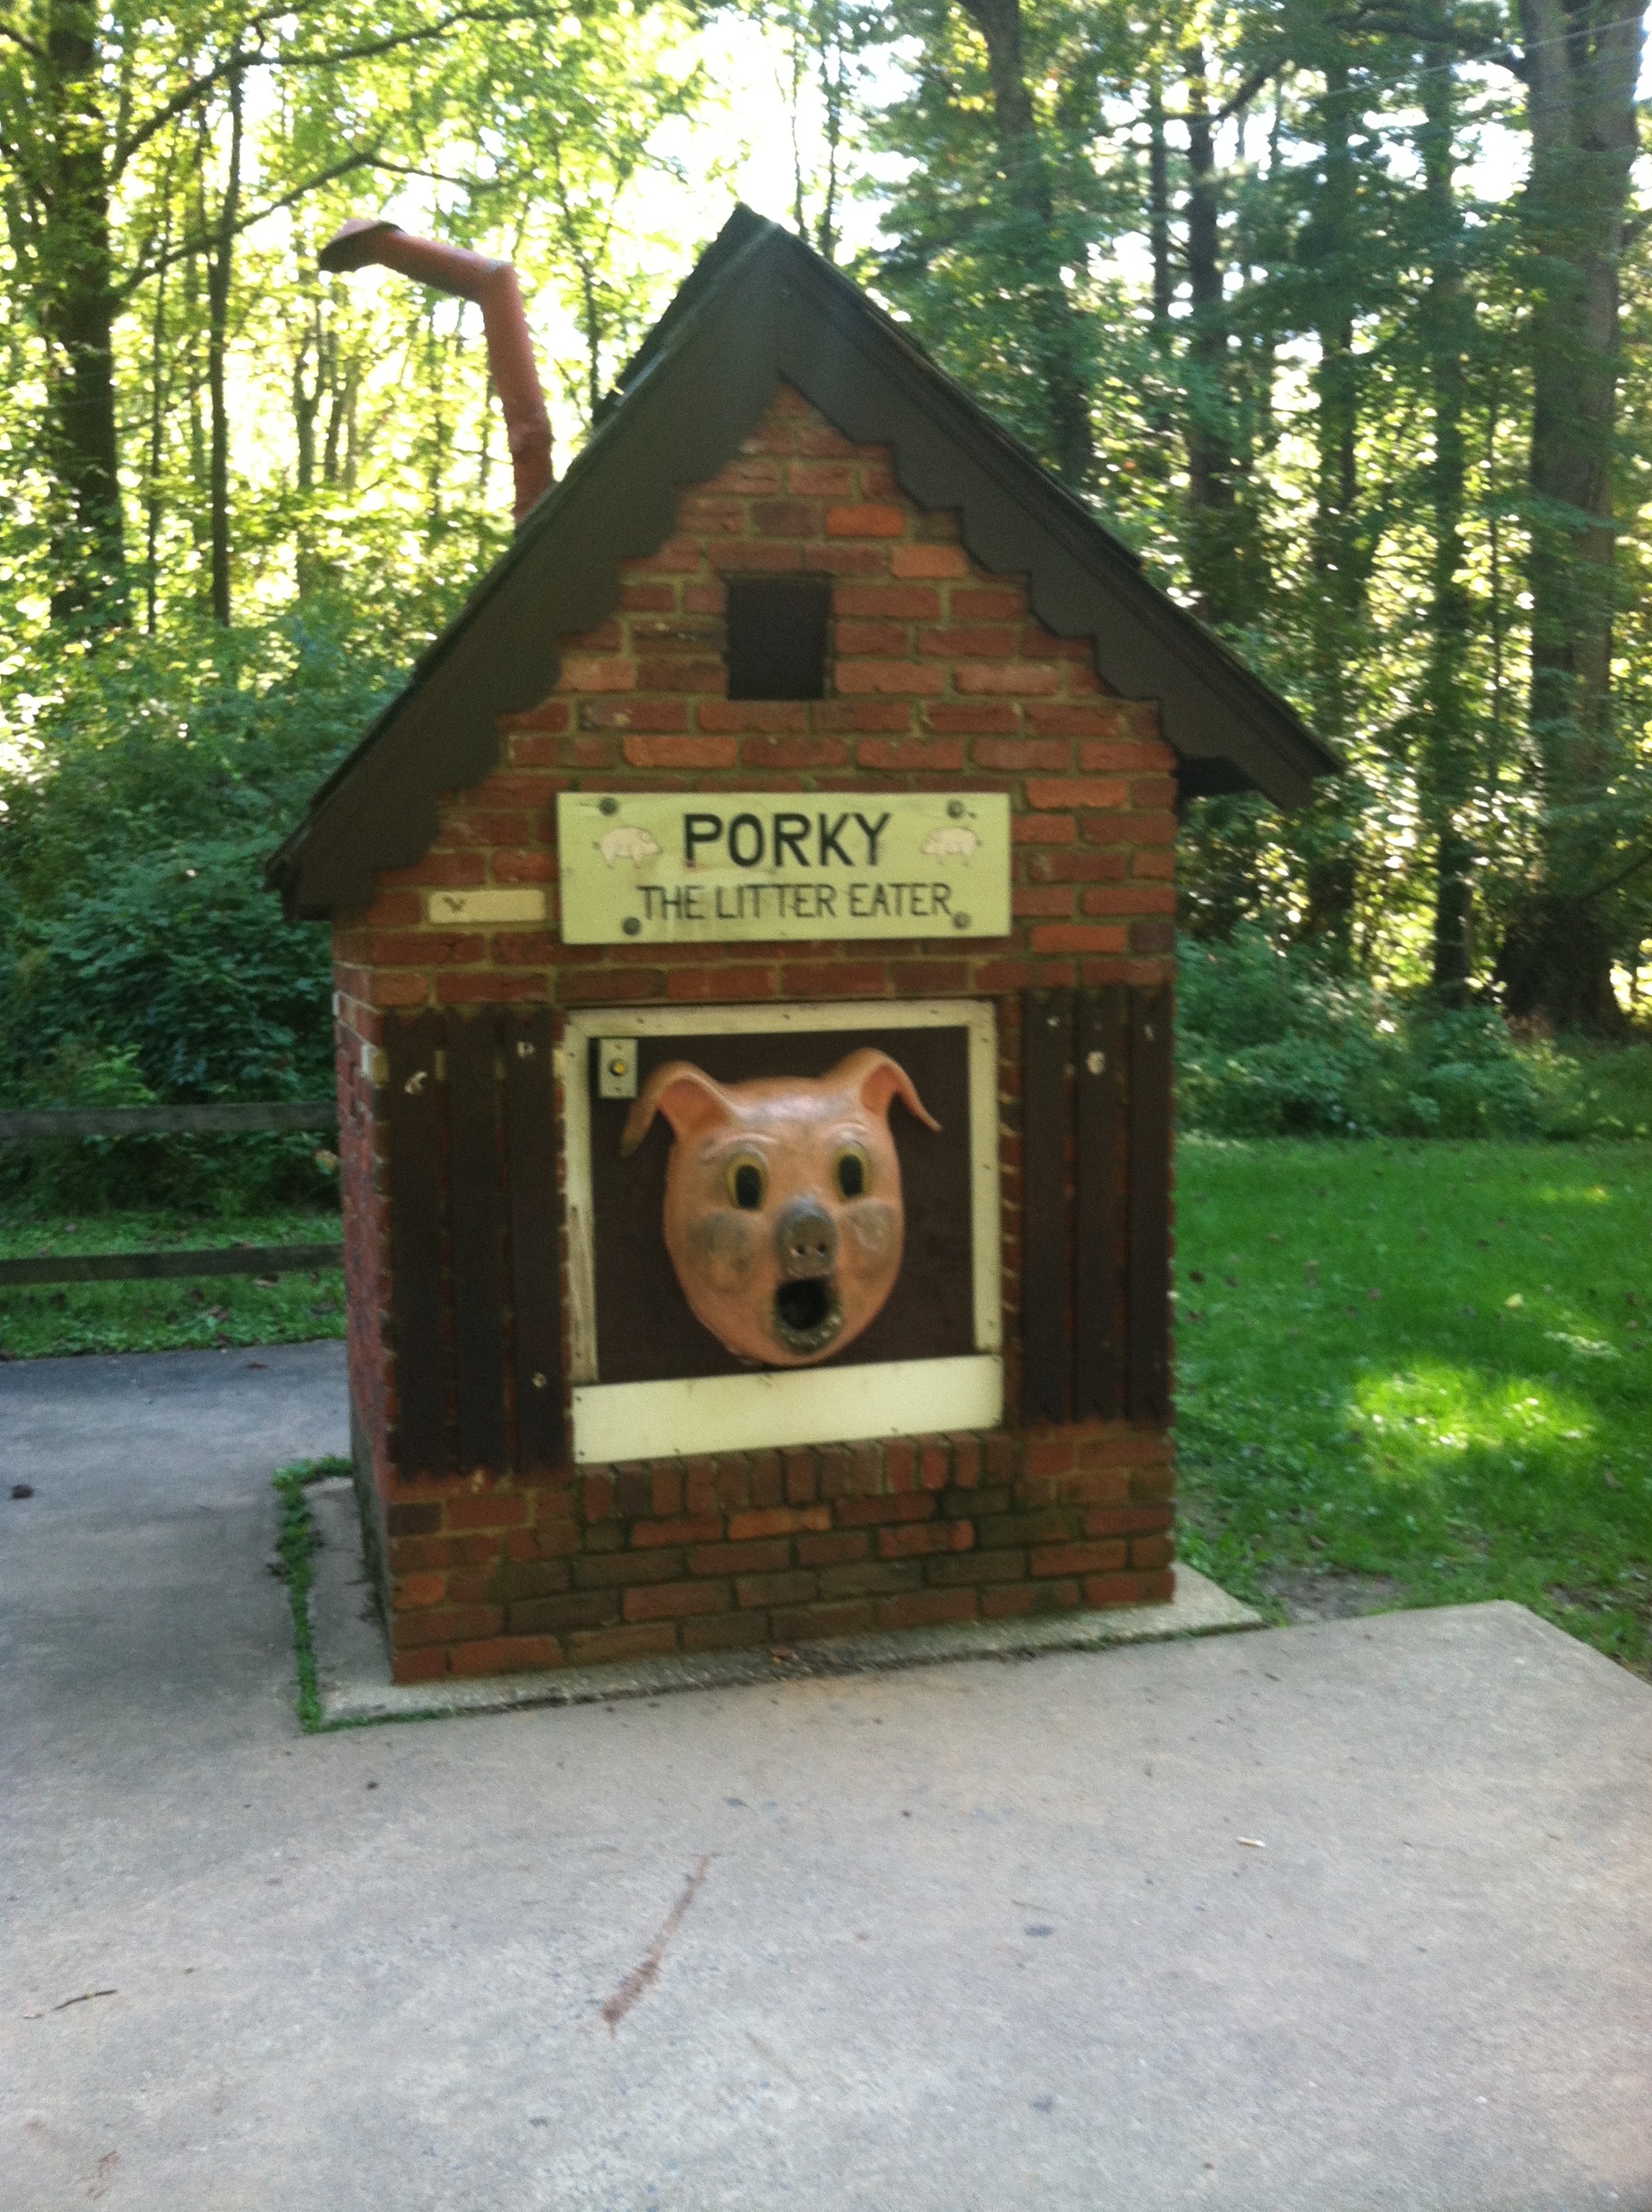 Porky the Litter Eater at Cabin John Park, a giant disembodied pig head mounted on a little brick building.